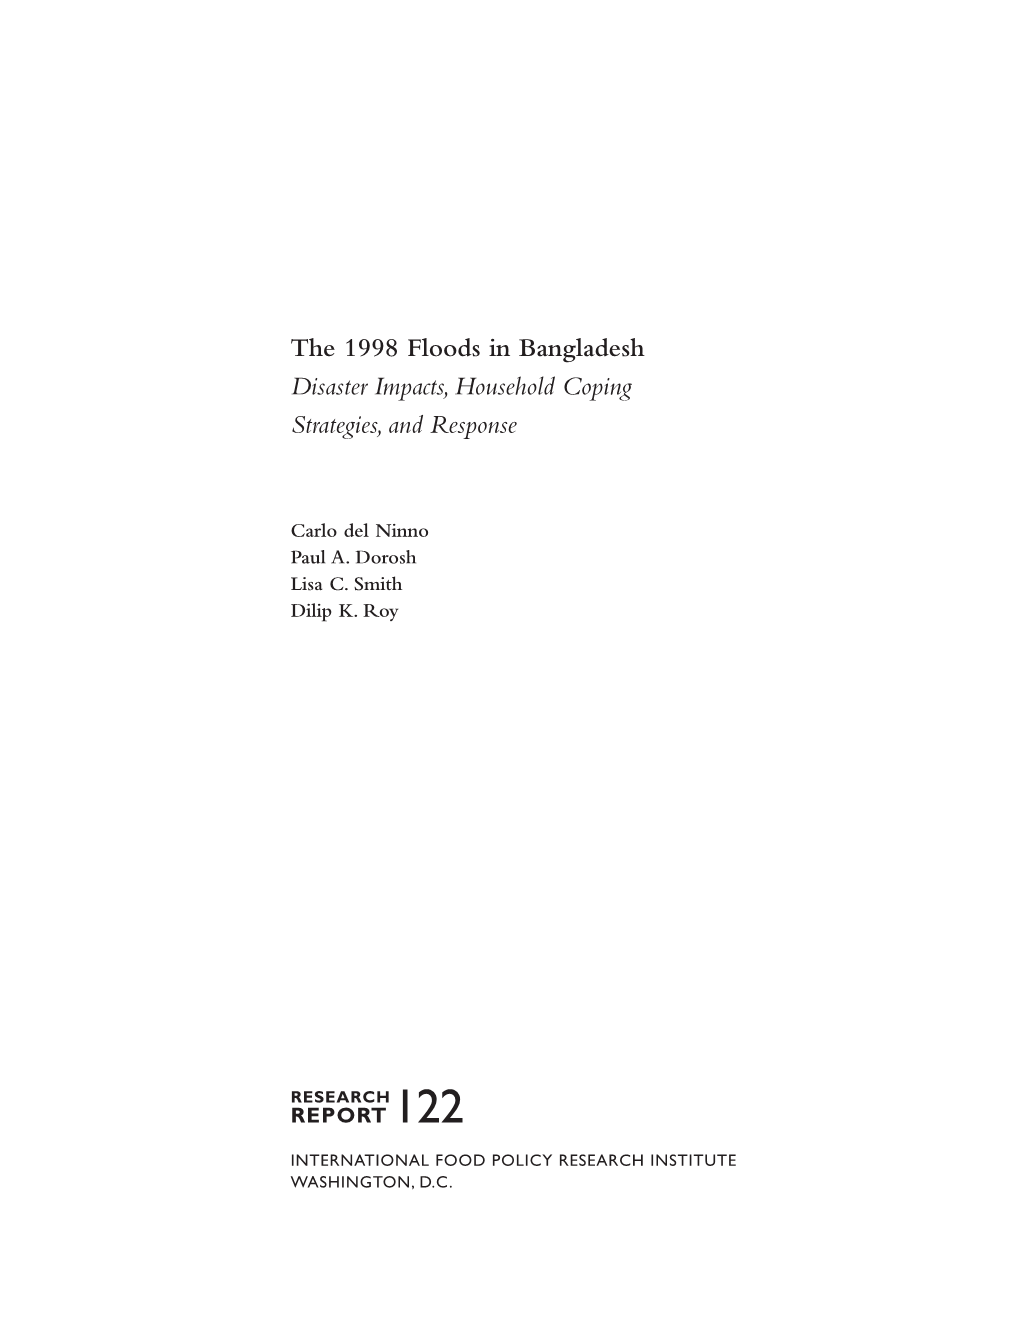 The 1998 Floods in Bangladesh Disaster Impacts, Household Coping Strategies, and Response